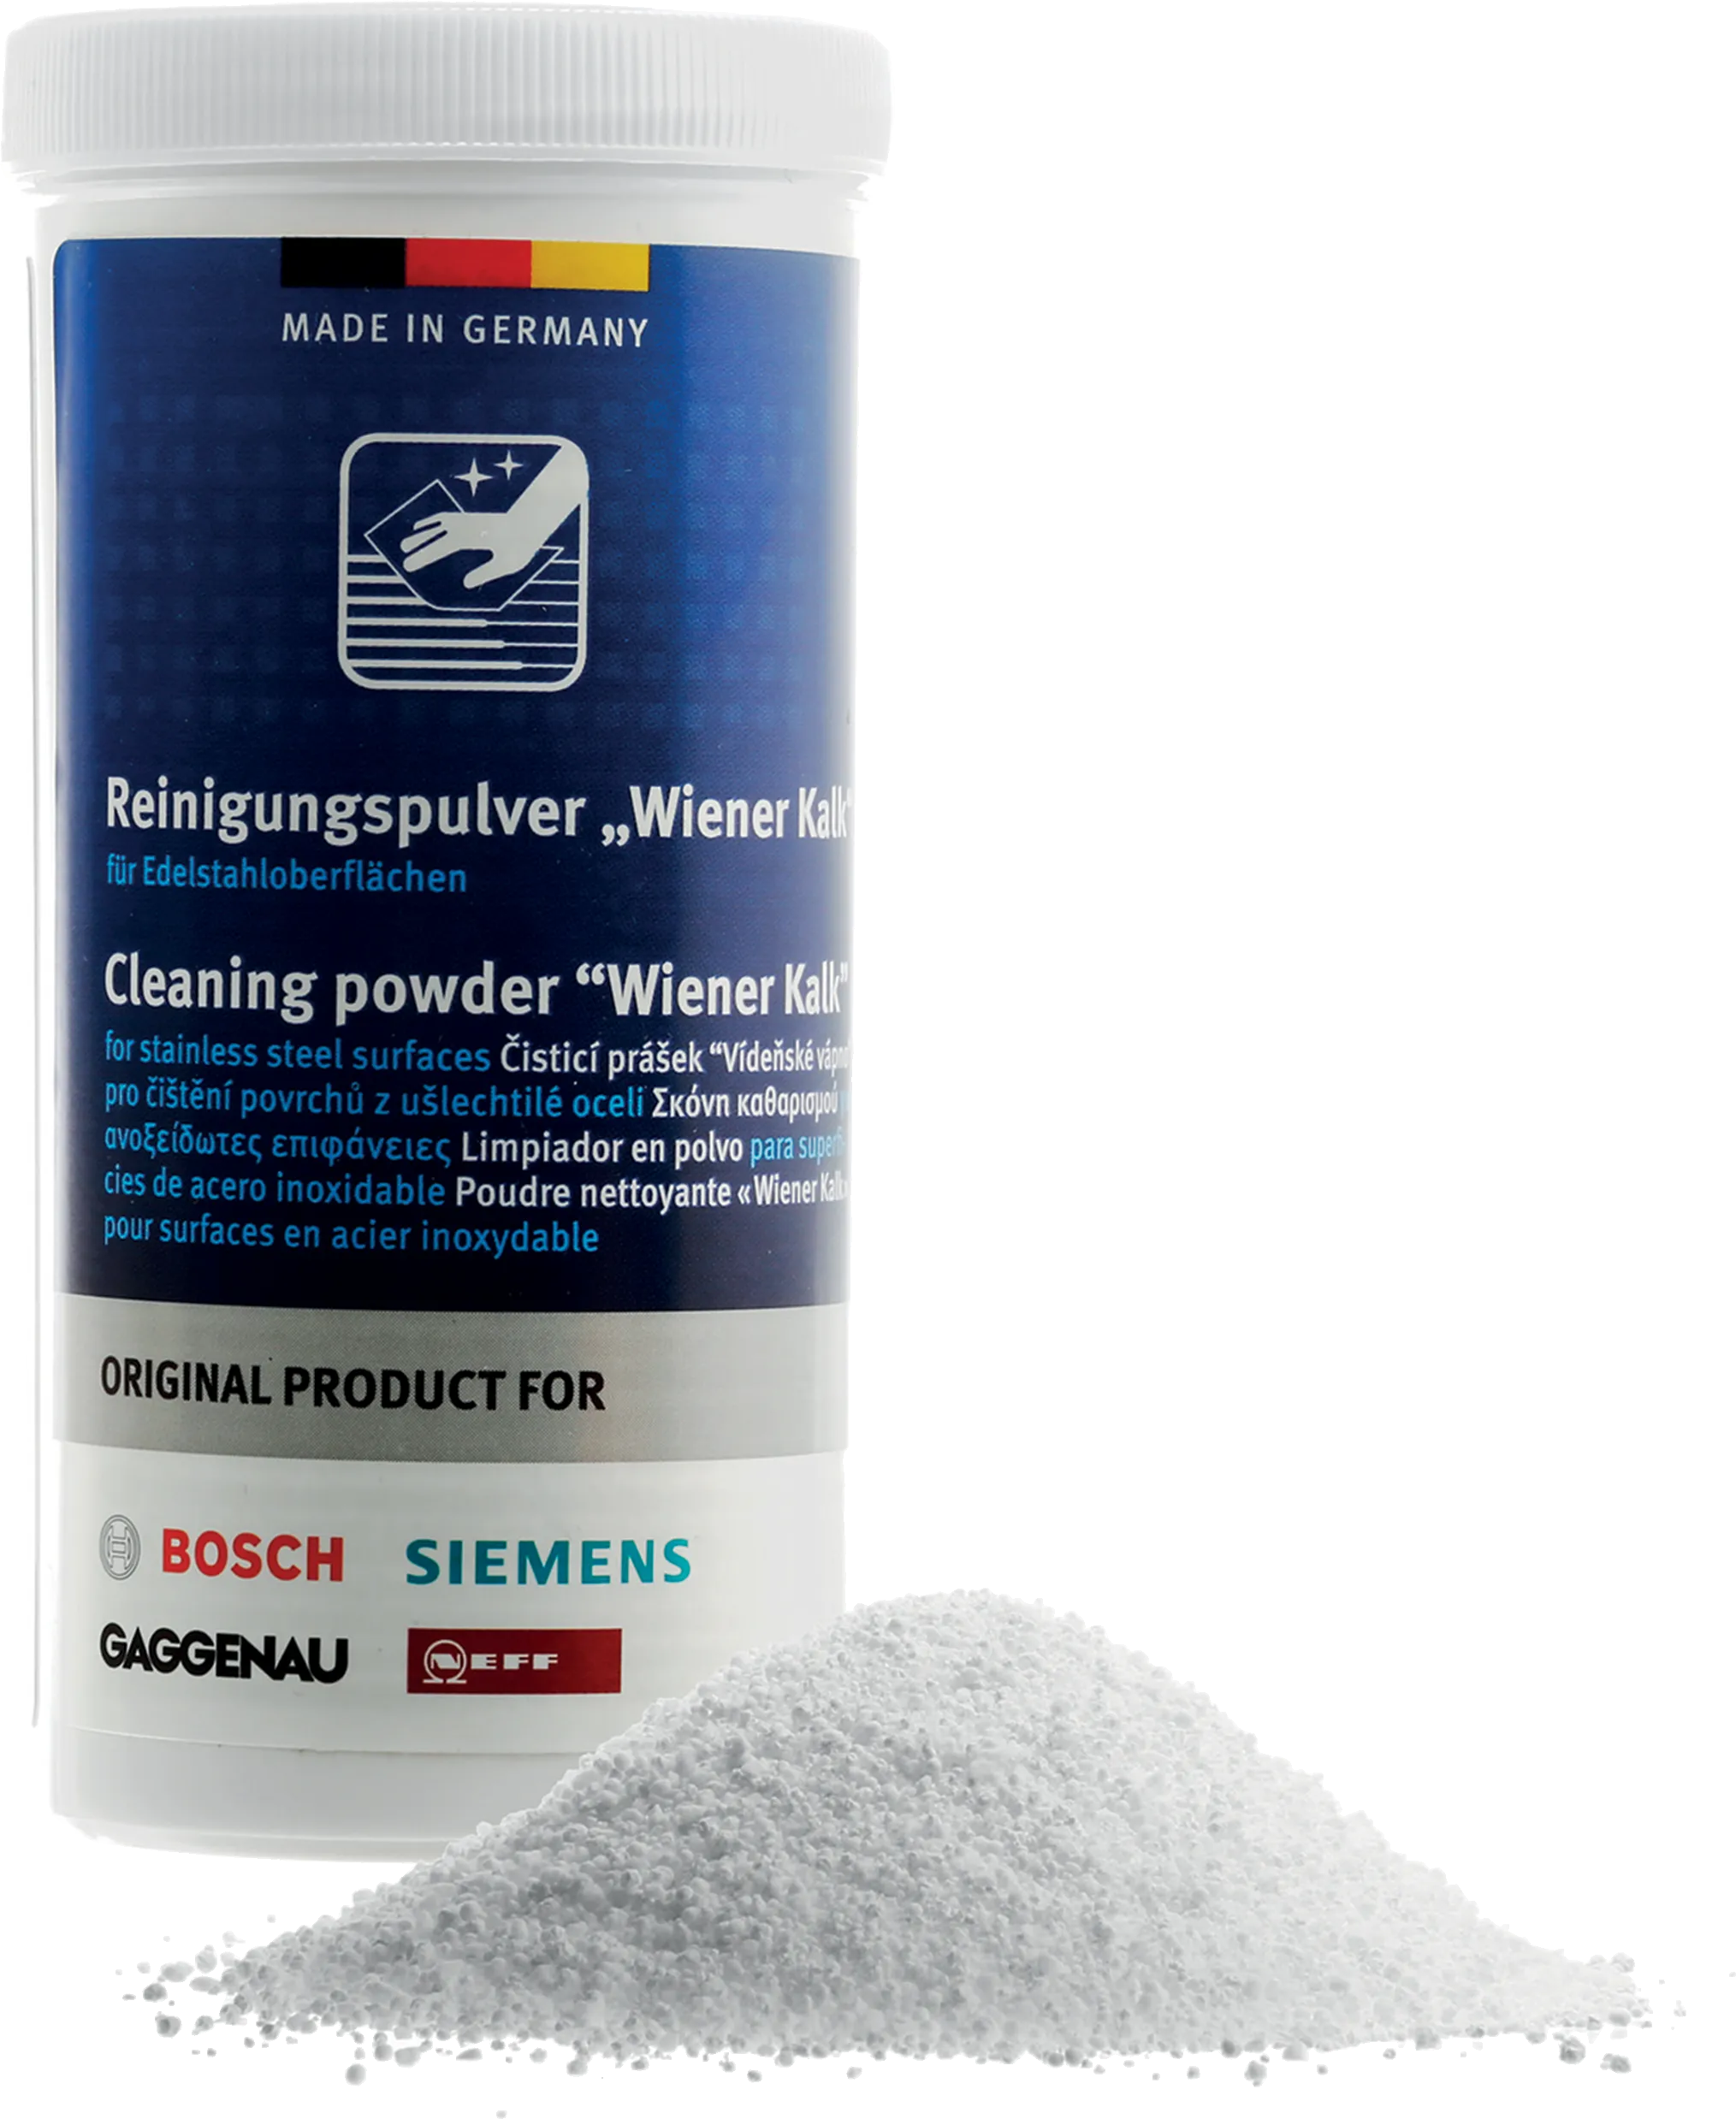 Cleaning powder "Wiener Kalk" for stainless steel surfaces 